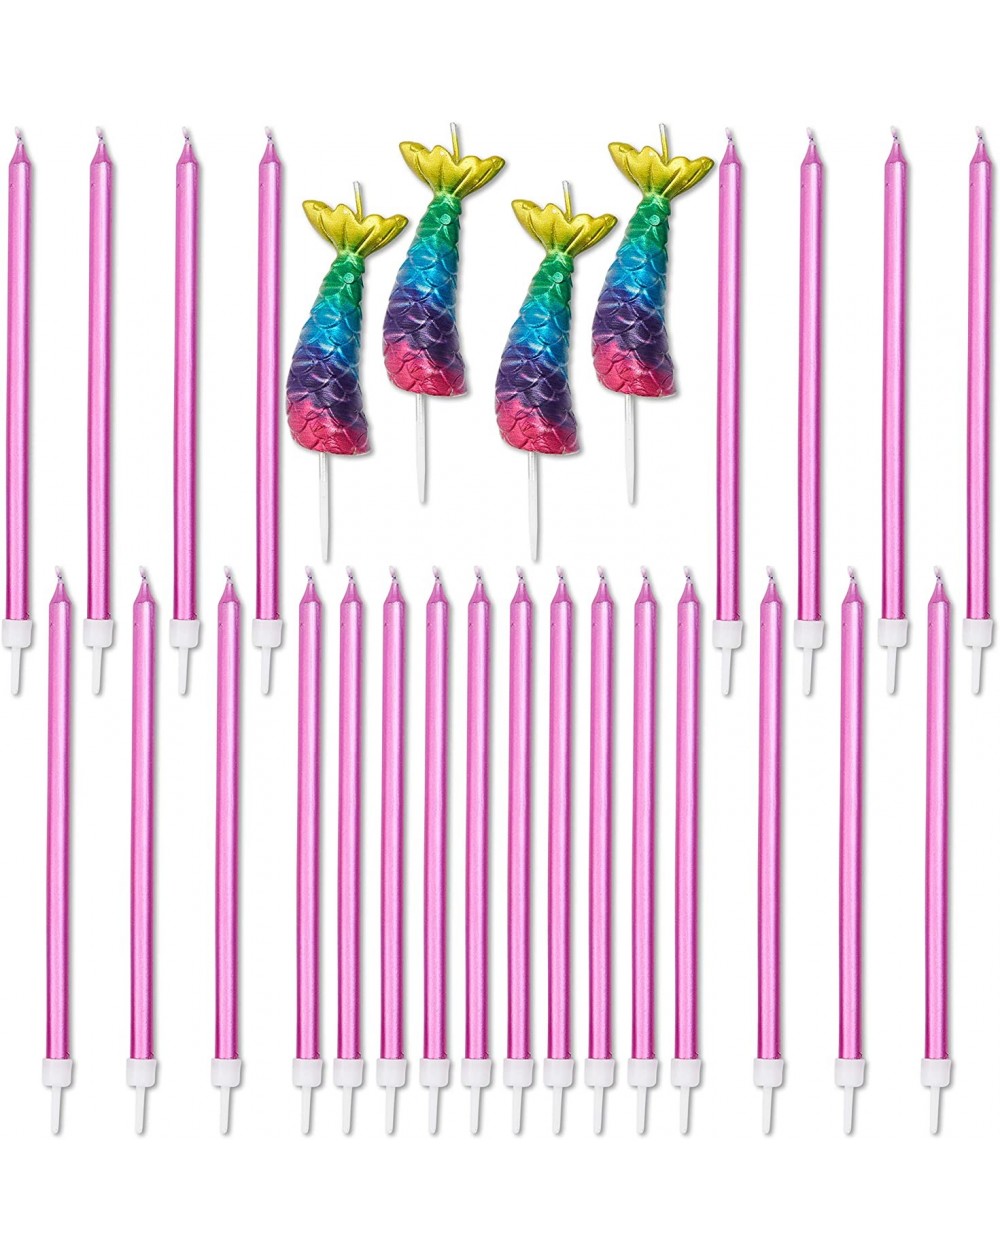 Birthday Candles Mermaid Tail Cake Topper with Thin Candles in Holders (Pink Metallic- 28 Pack) - CN18T3QI843 $13.14